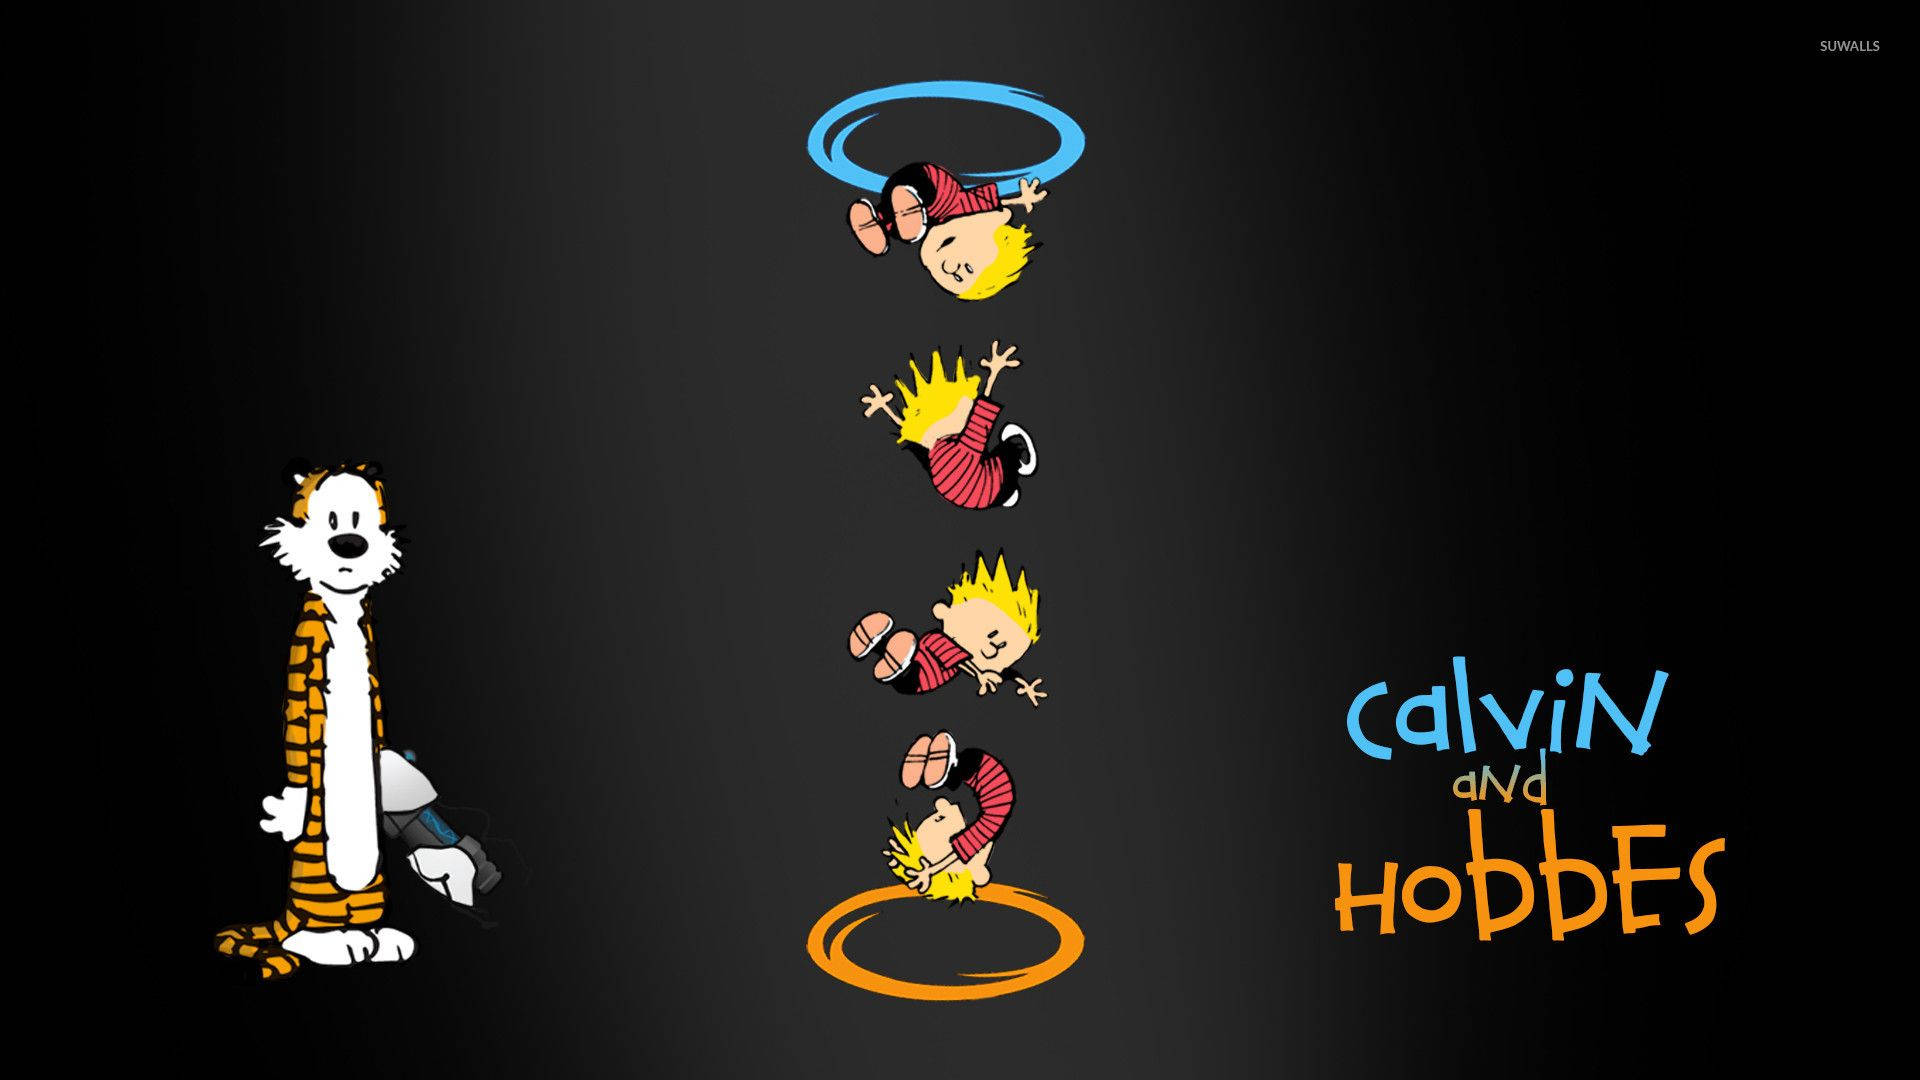 Calvin And Hobbes Teleportation Ring Background